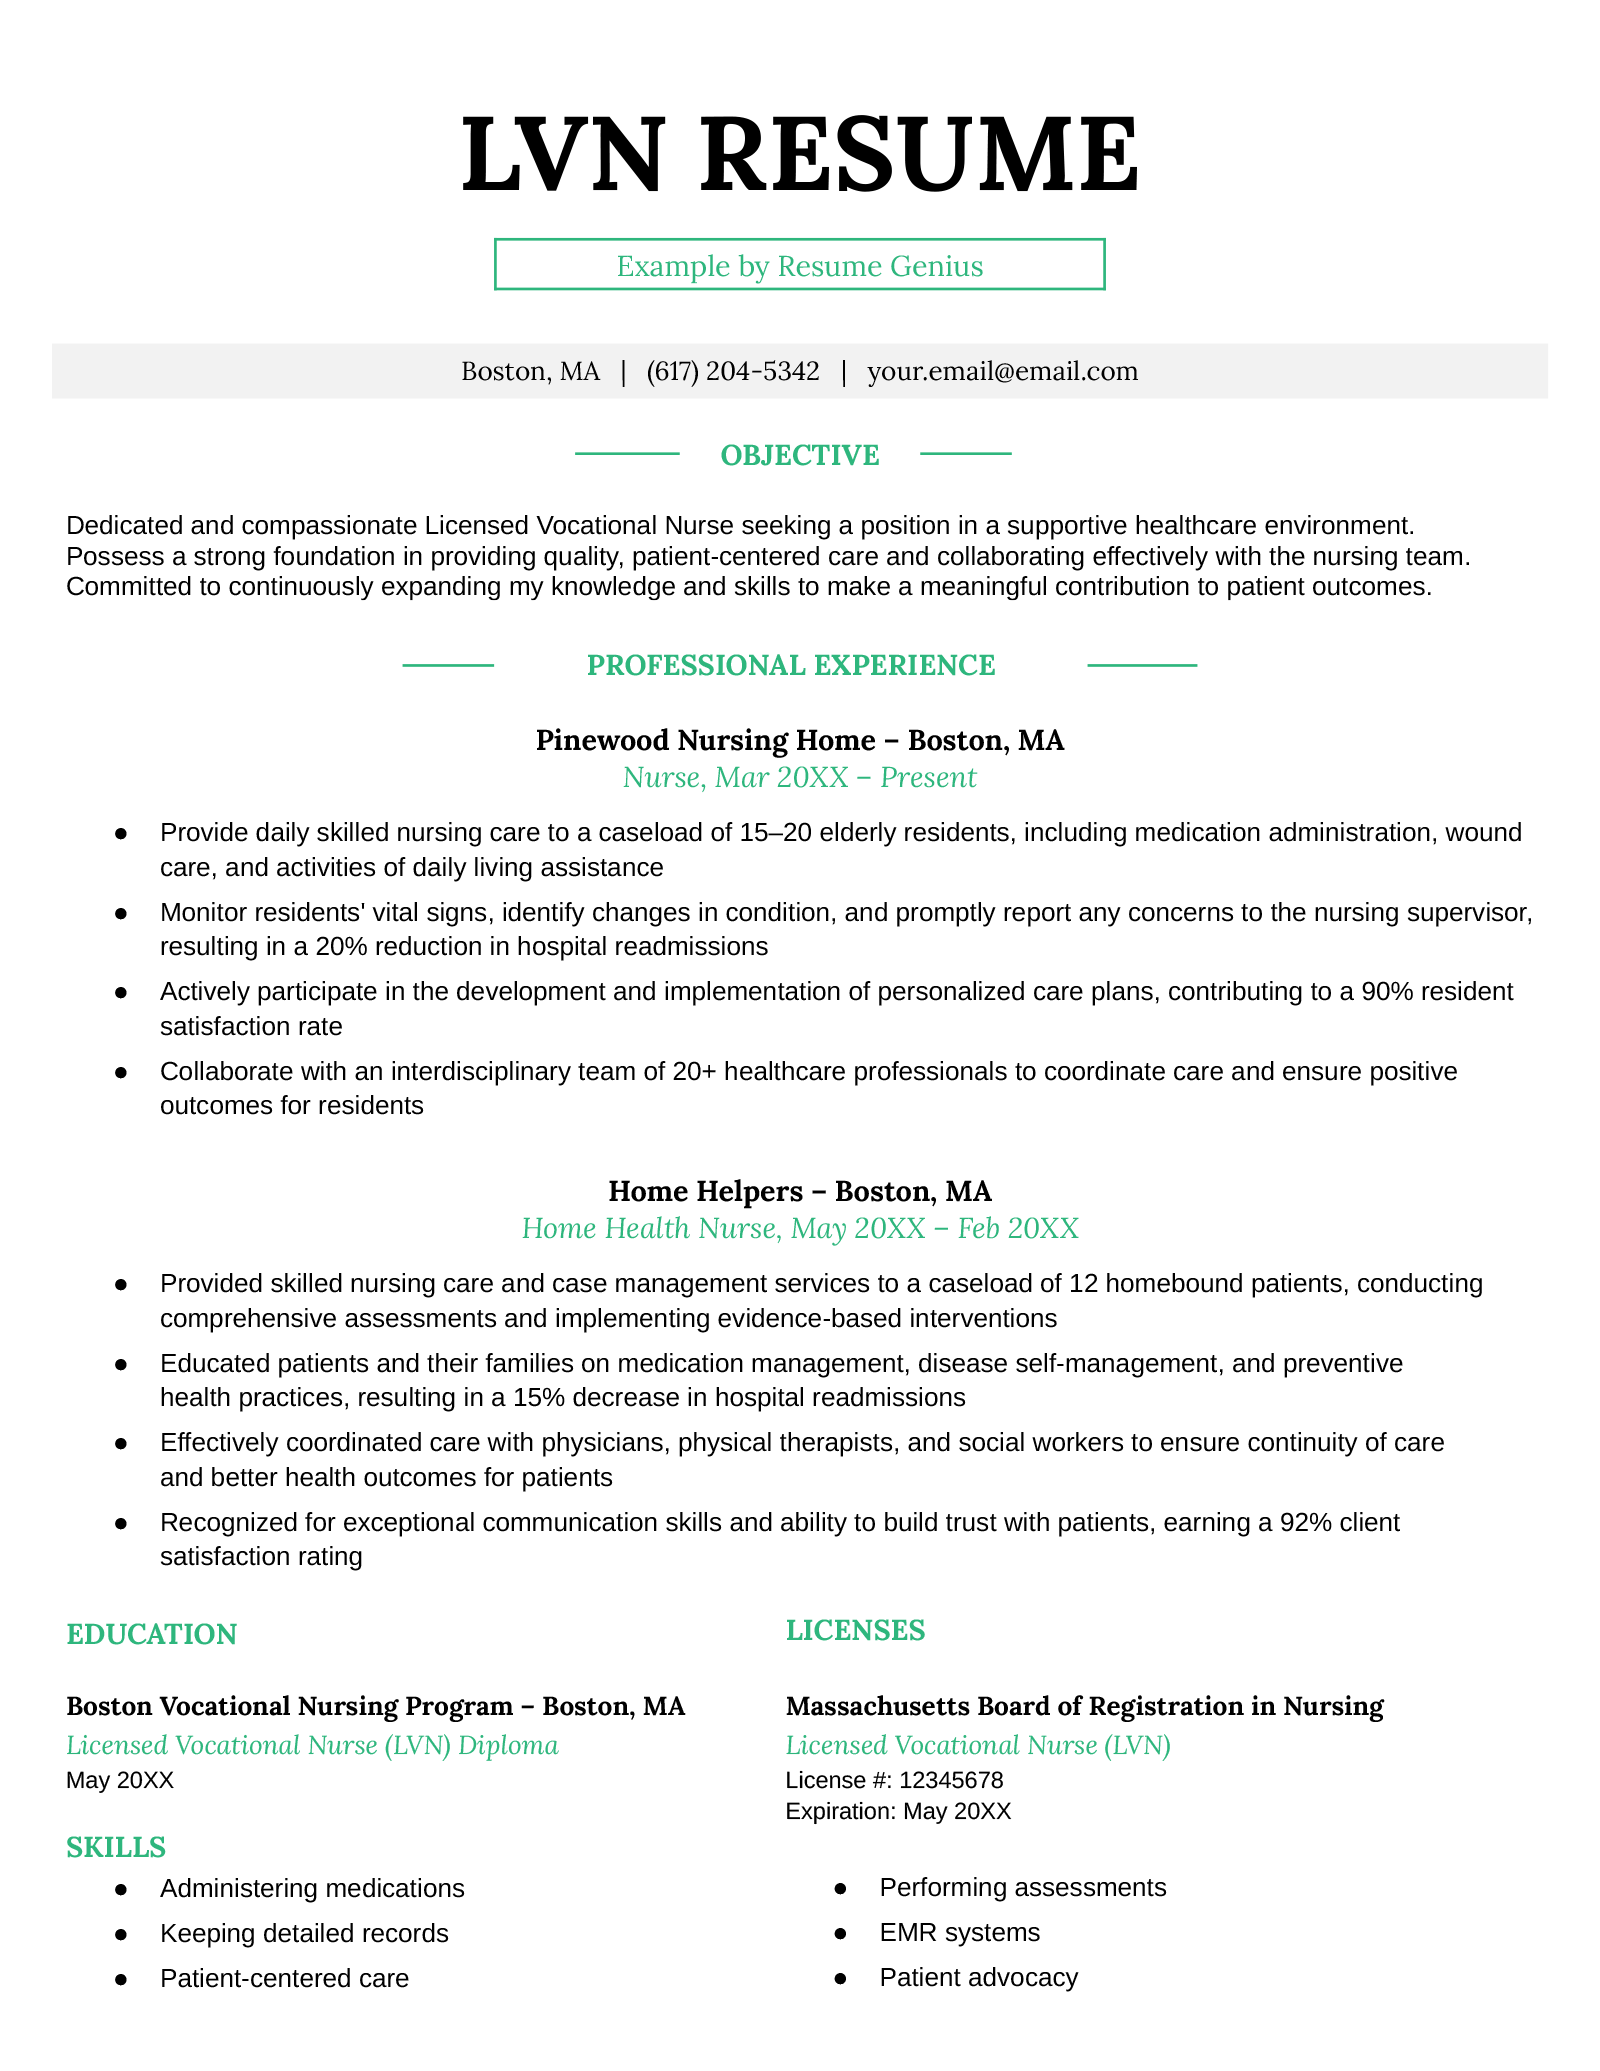 An example resume for an LVN.